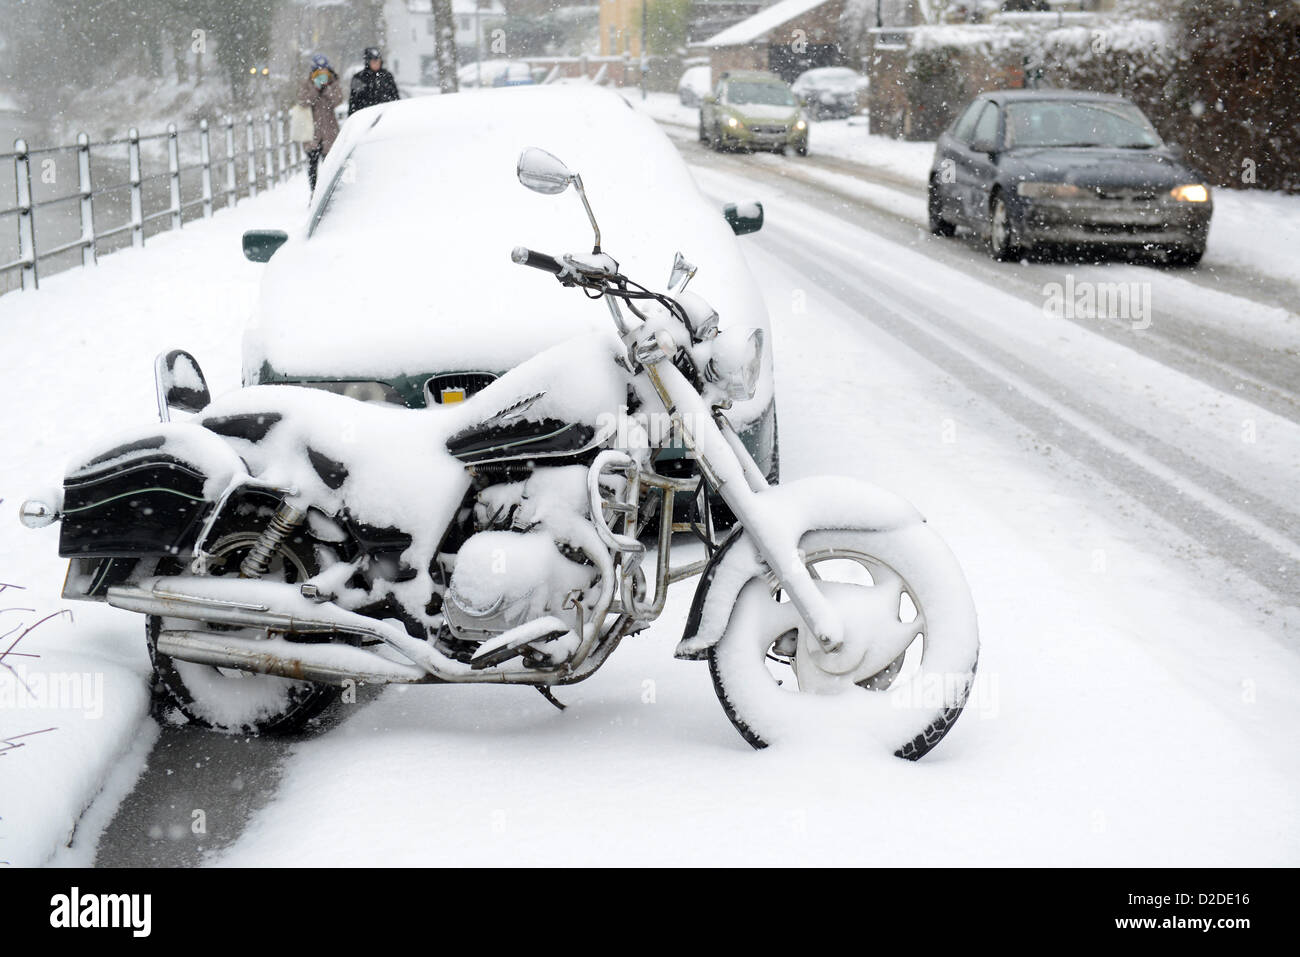 Motorbike covered in snow Uk. winter snowing roads road Britain weather conditions dangers dangerous transport driving British Stock Photo